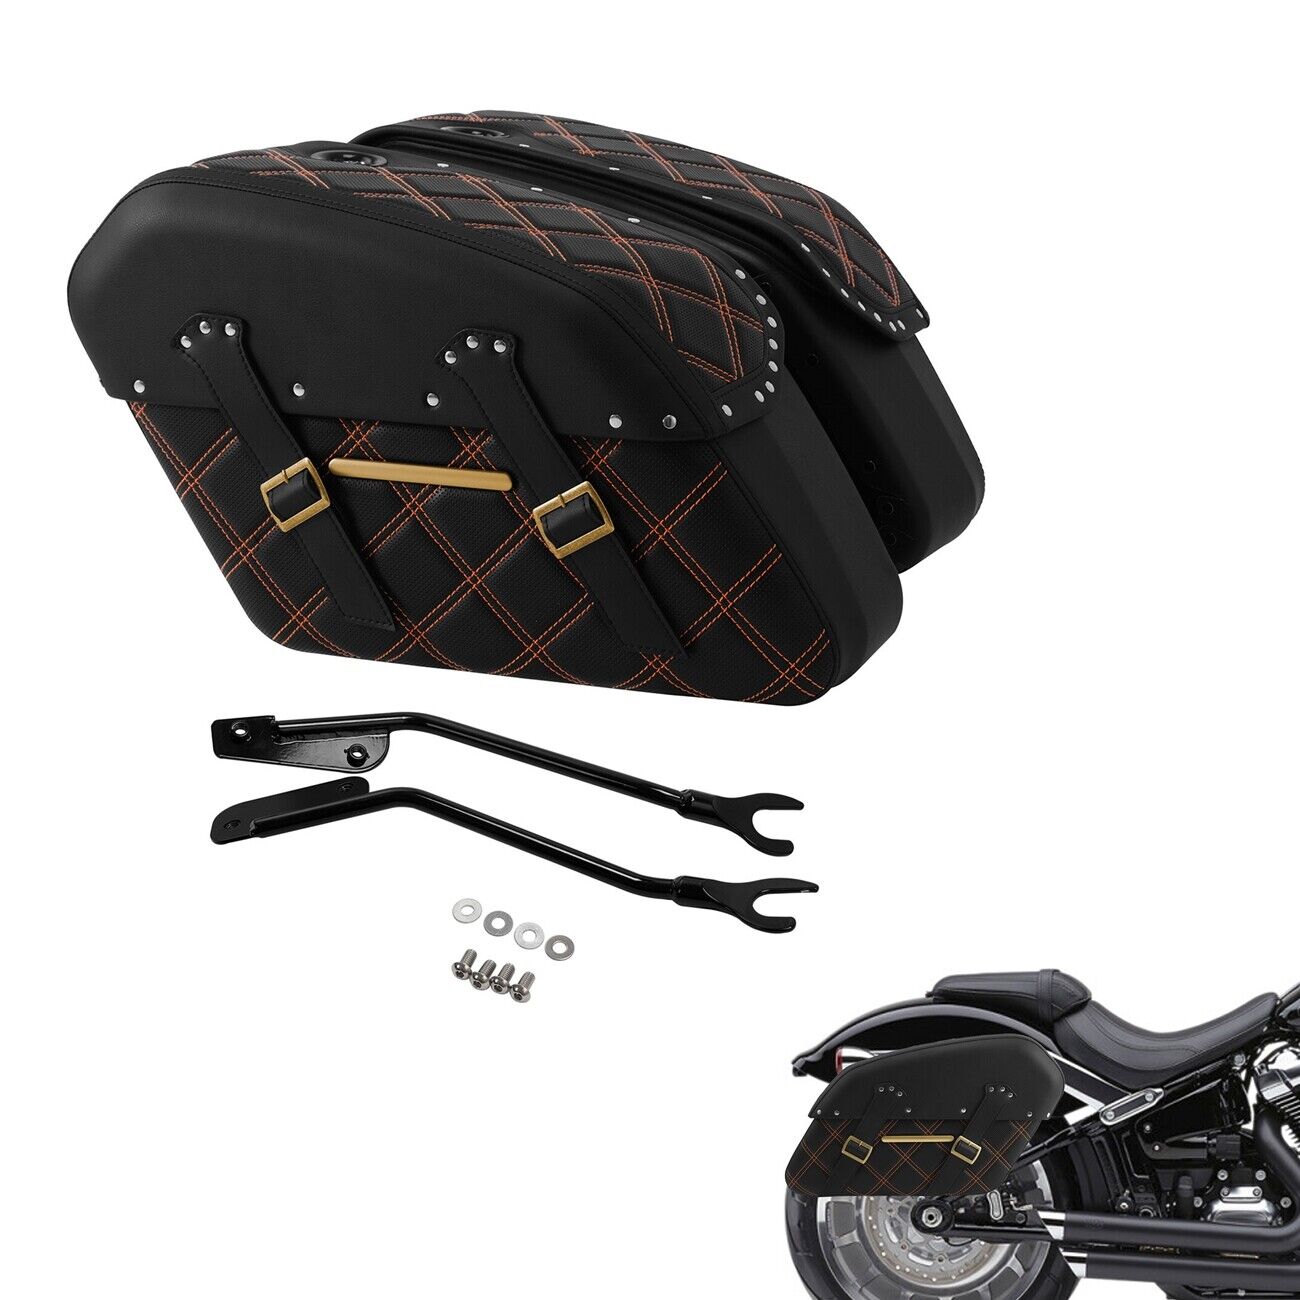 Black+Orange Saddlebags Fit For Harley Softail Breakout Fat Boy FLFB 2018-Later